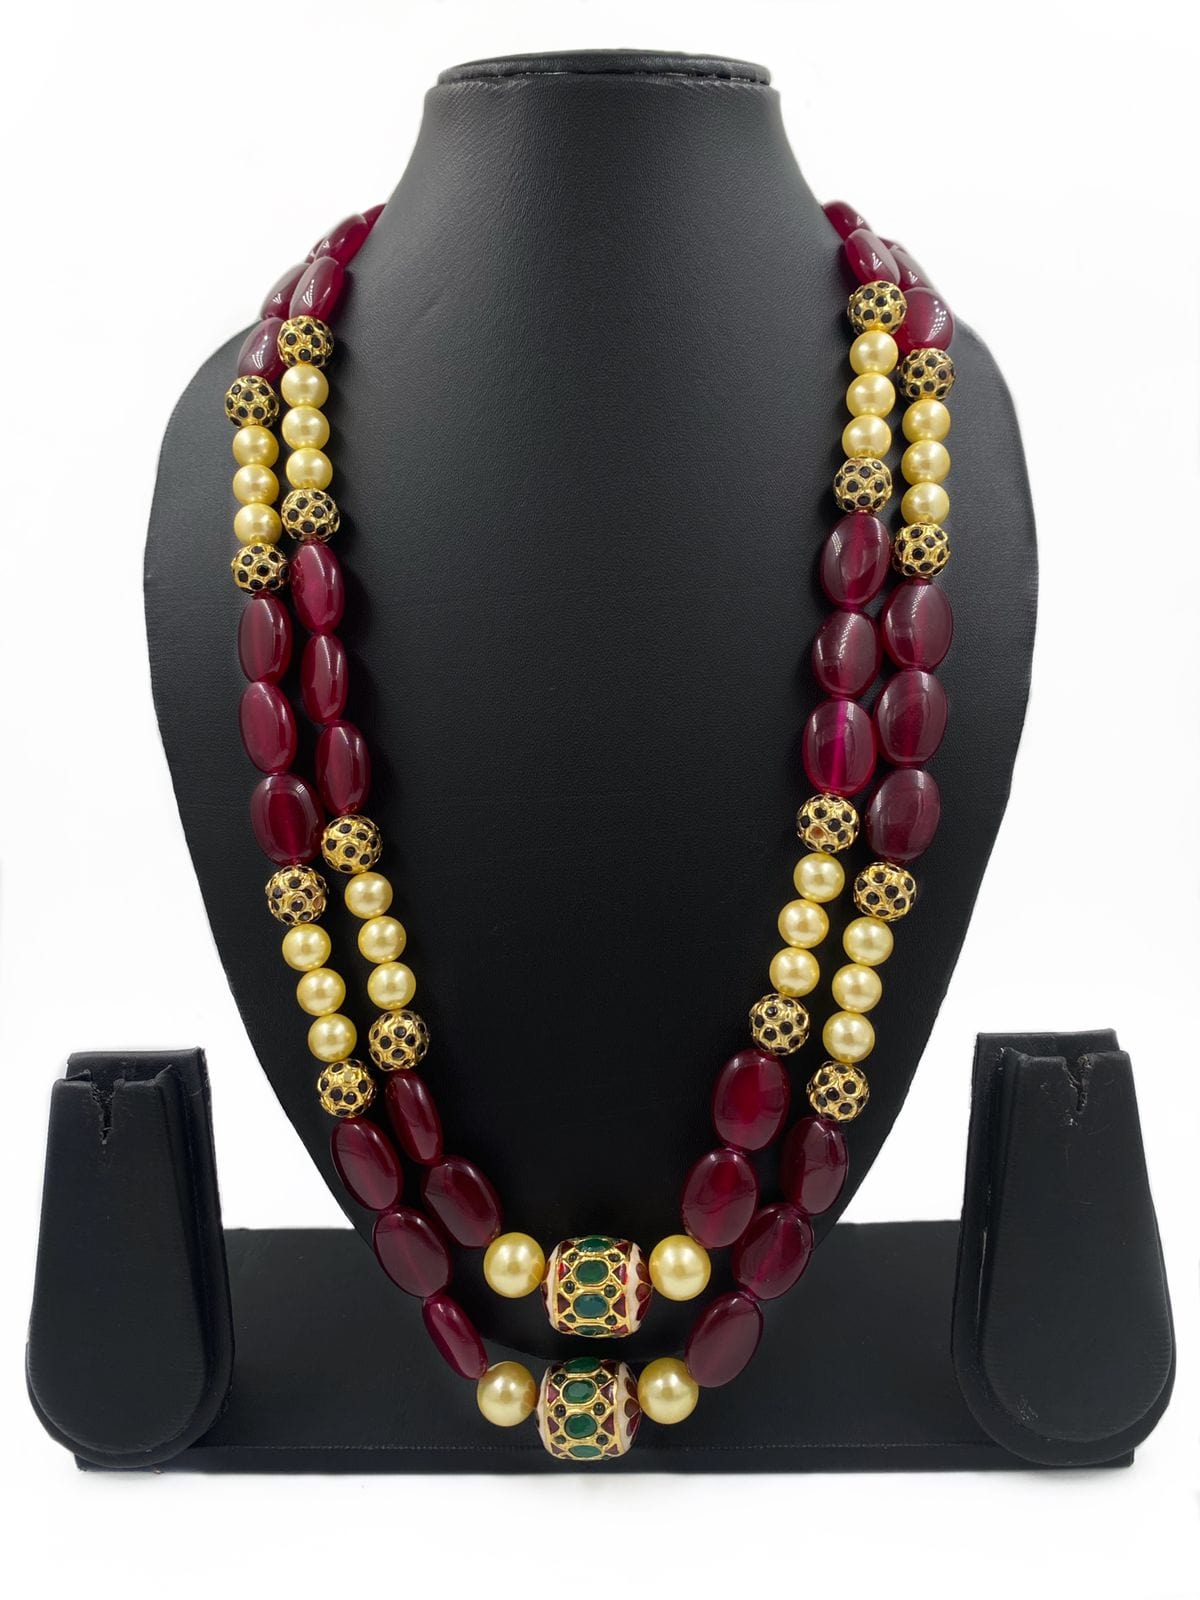 Semi Precious Maroon Jade Stone Beads Necklace Handcrafted For Men And Women By Gehna Shop Beads Jewellery